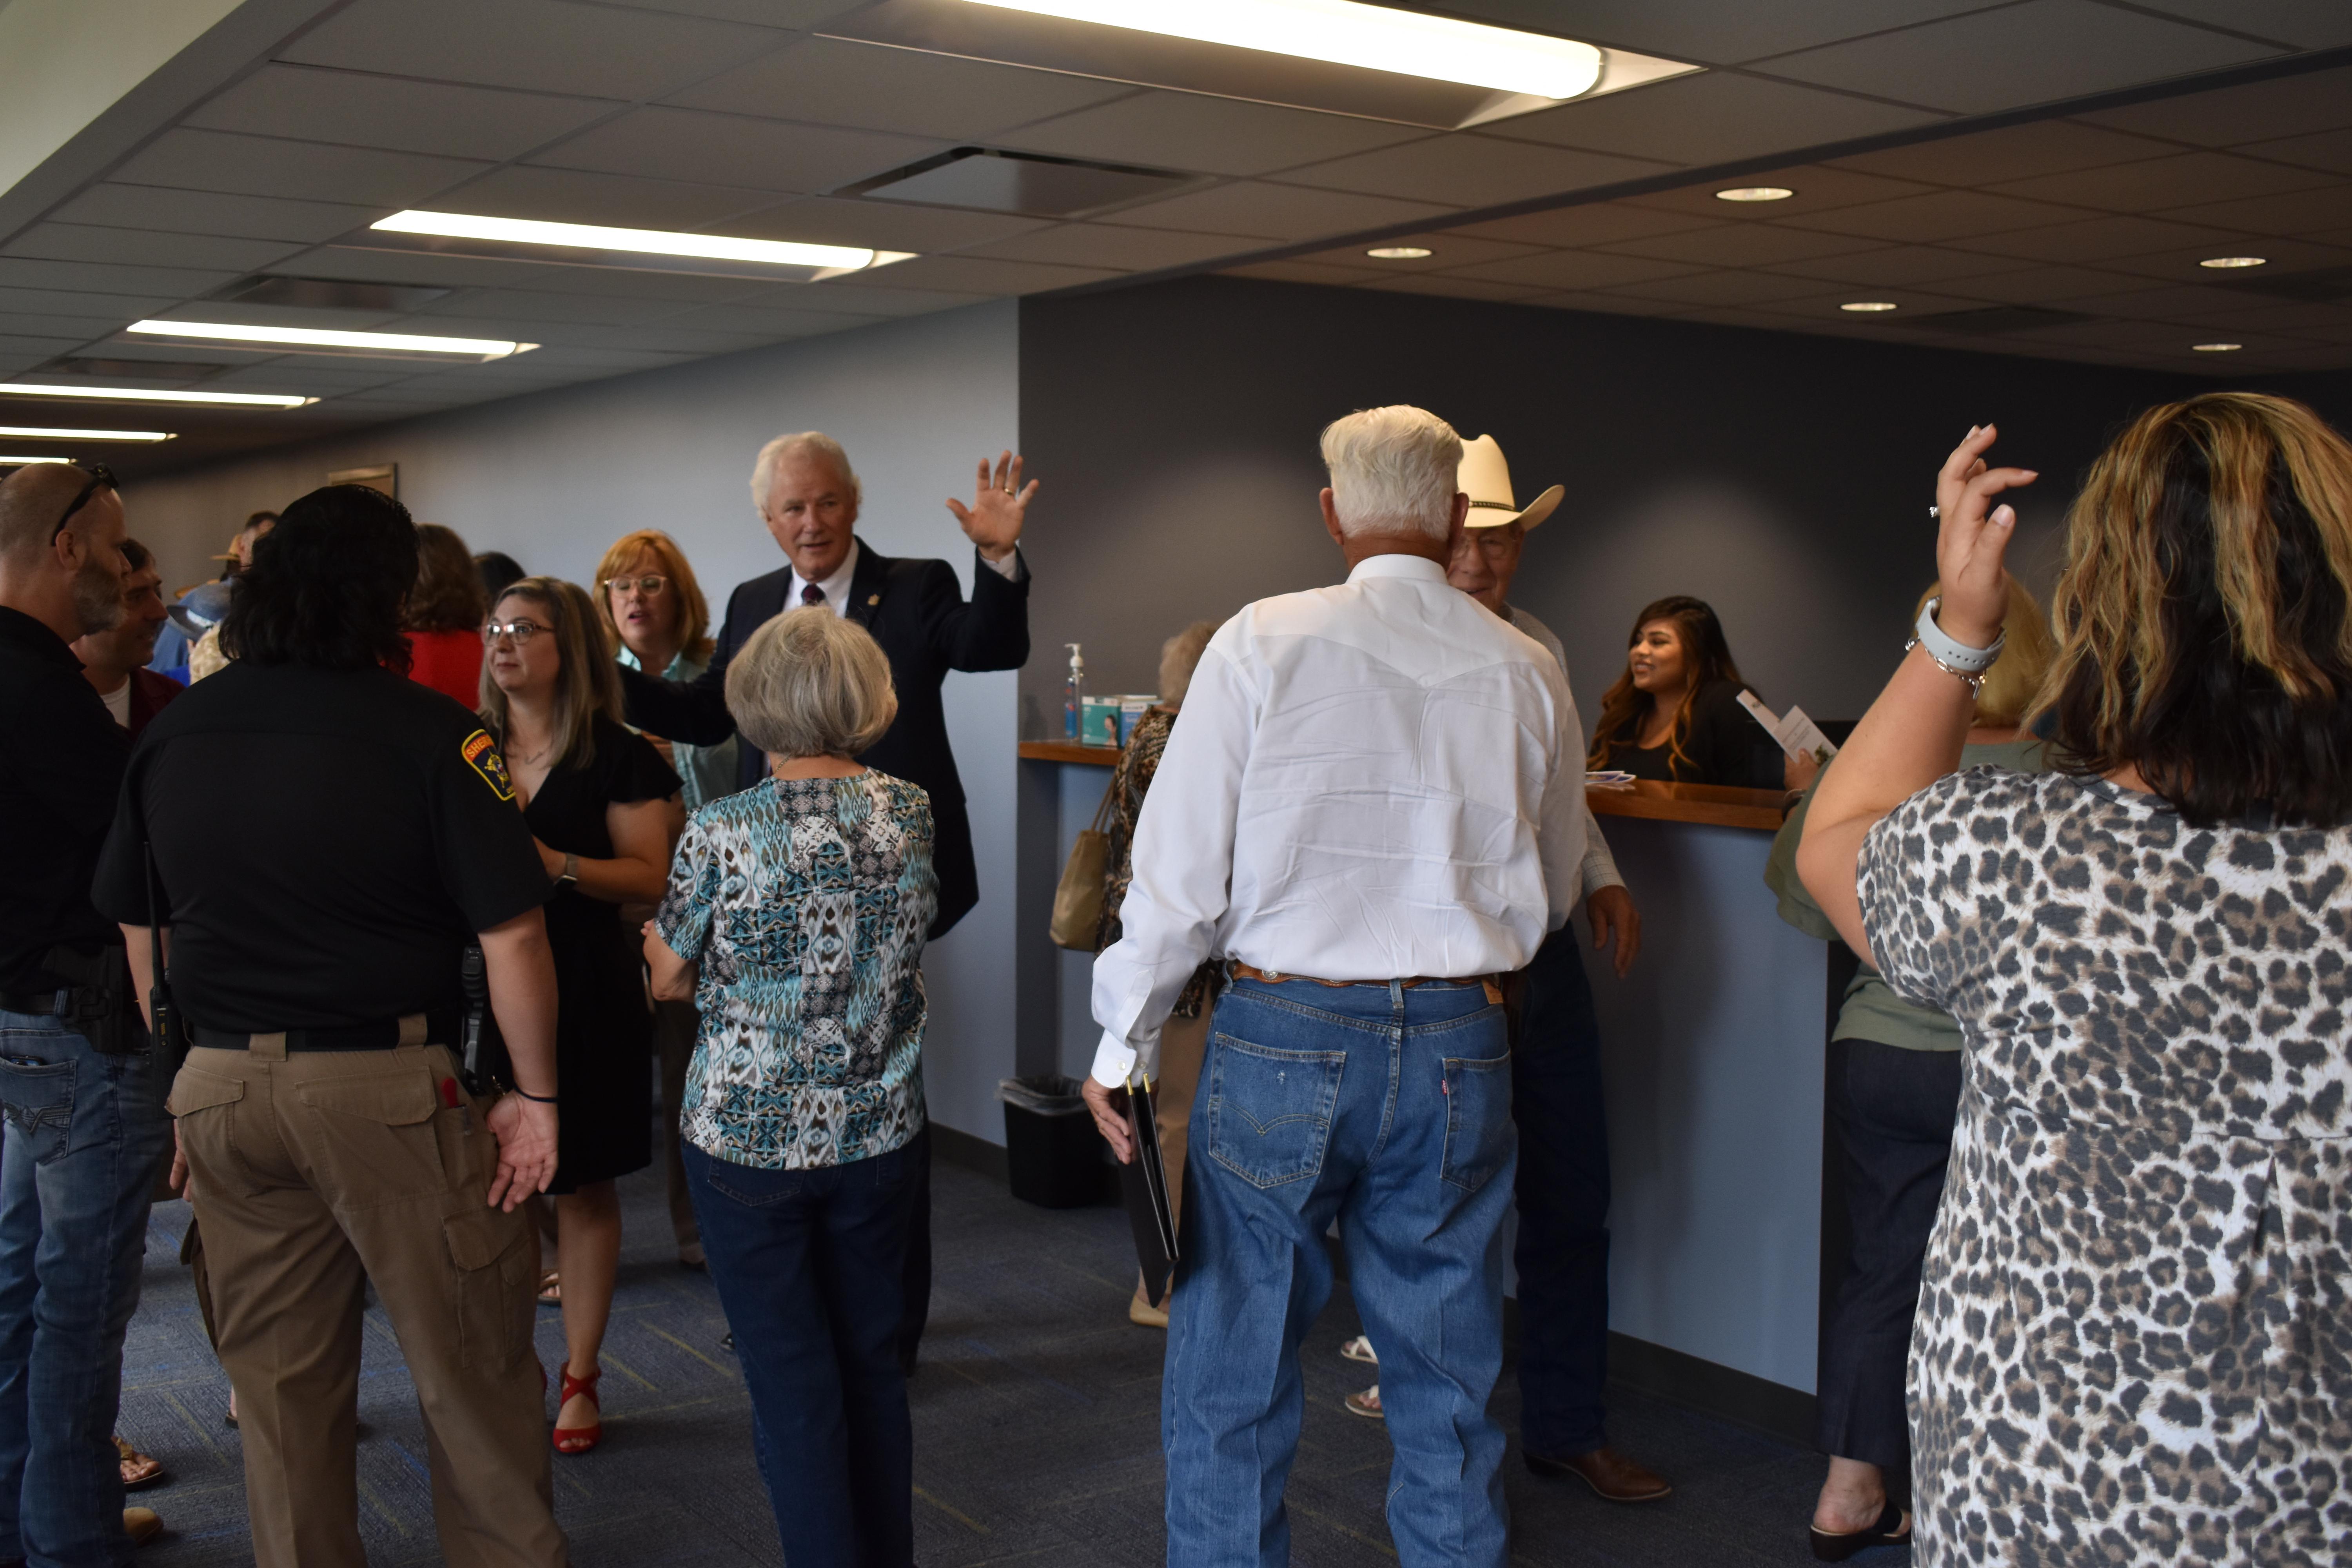 MIlam County Annex holds grand opening The Cameron Herald